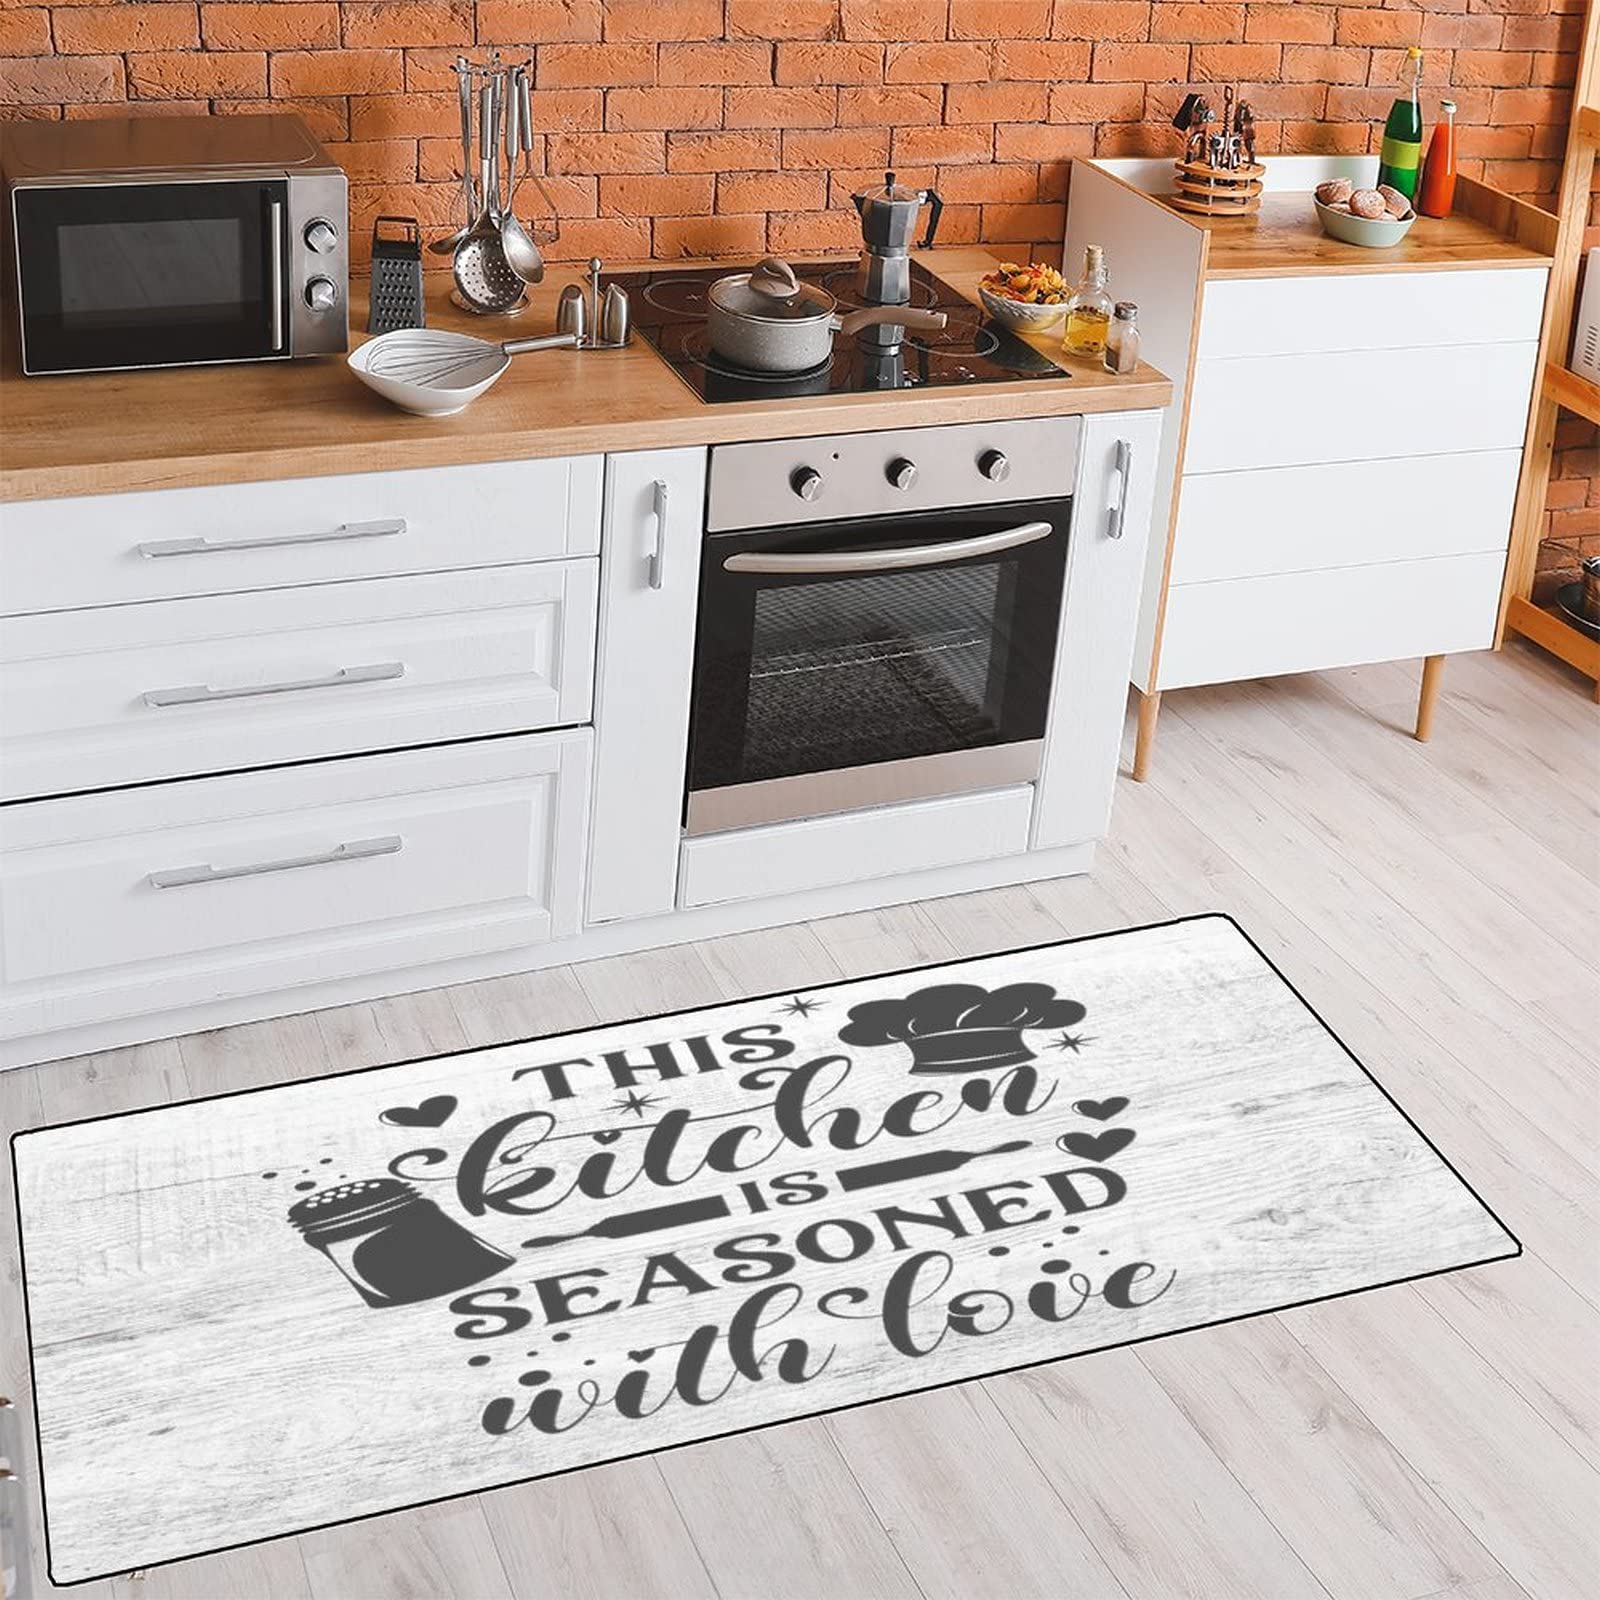 Kitchen Rugs This Kitchen is Seasoned with Love Non-Slip Soft Kitchen Mats Funny Kitchen Quotes Bath Rug Runner Doormats Carpet for Home Decor, 39" X 20"